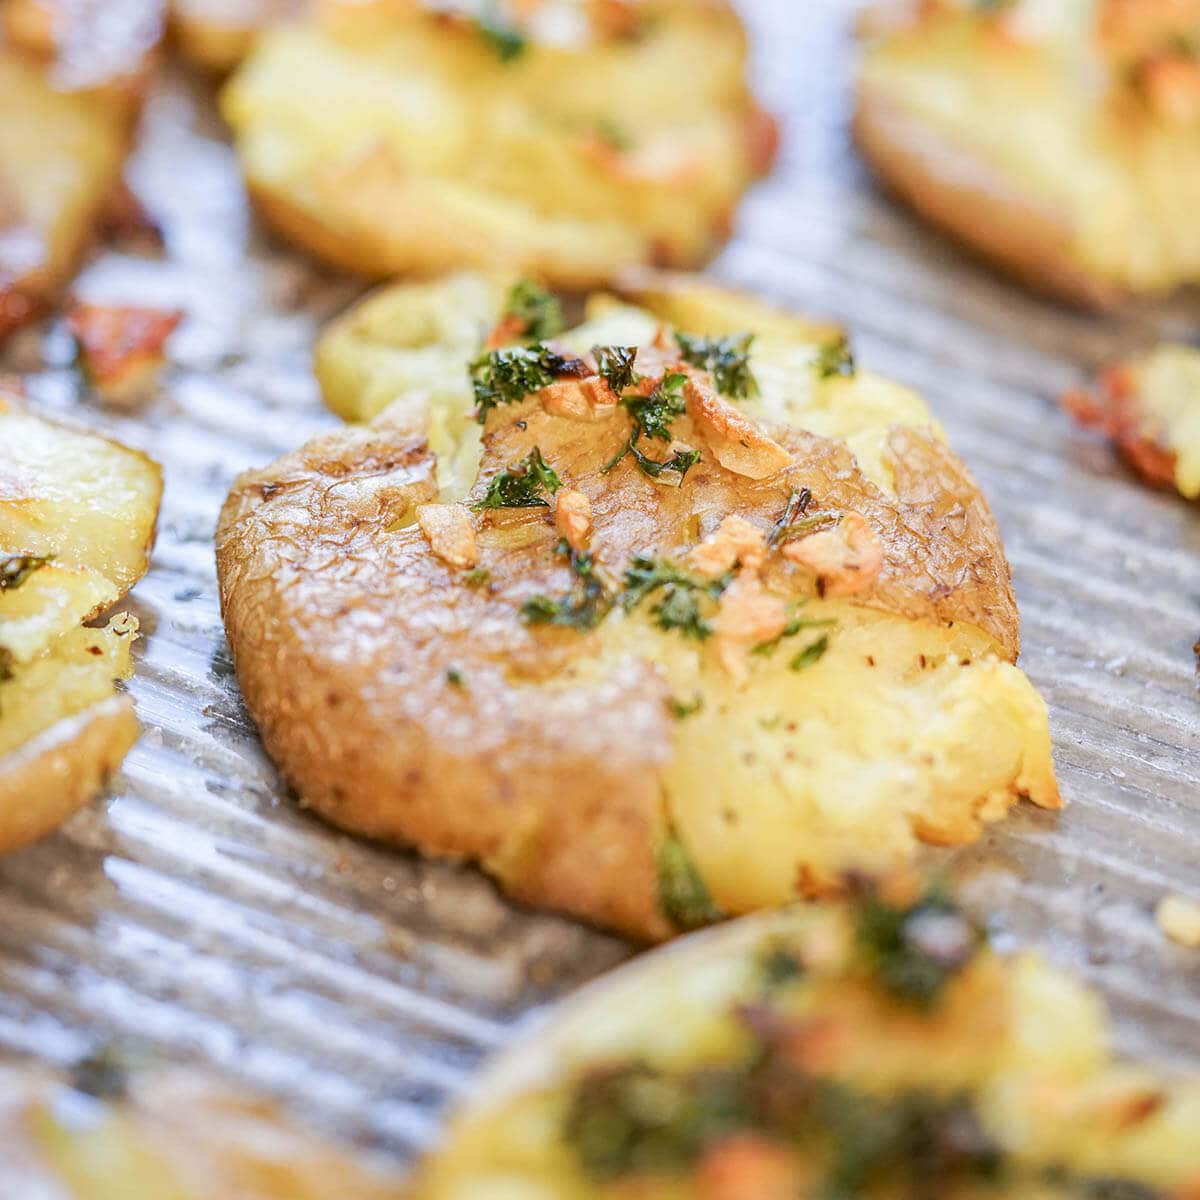 Smashed potatoes on sheet pan that have been baked until crispy.